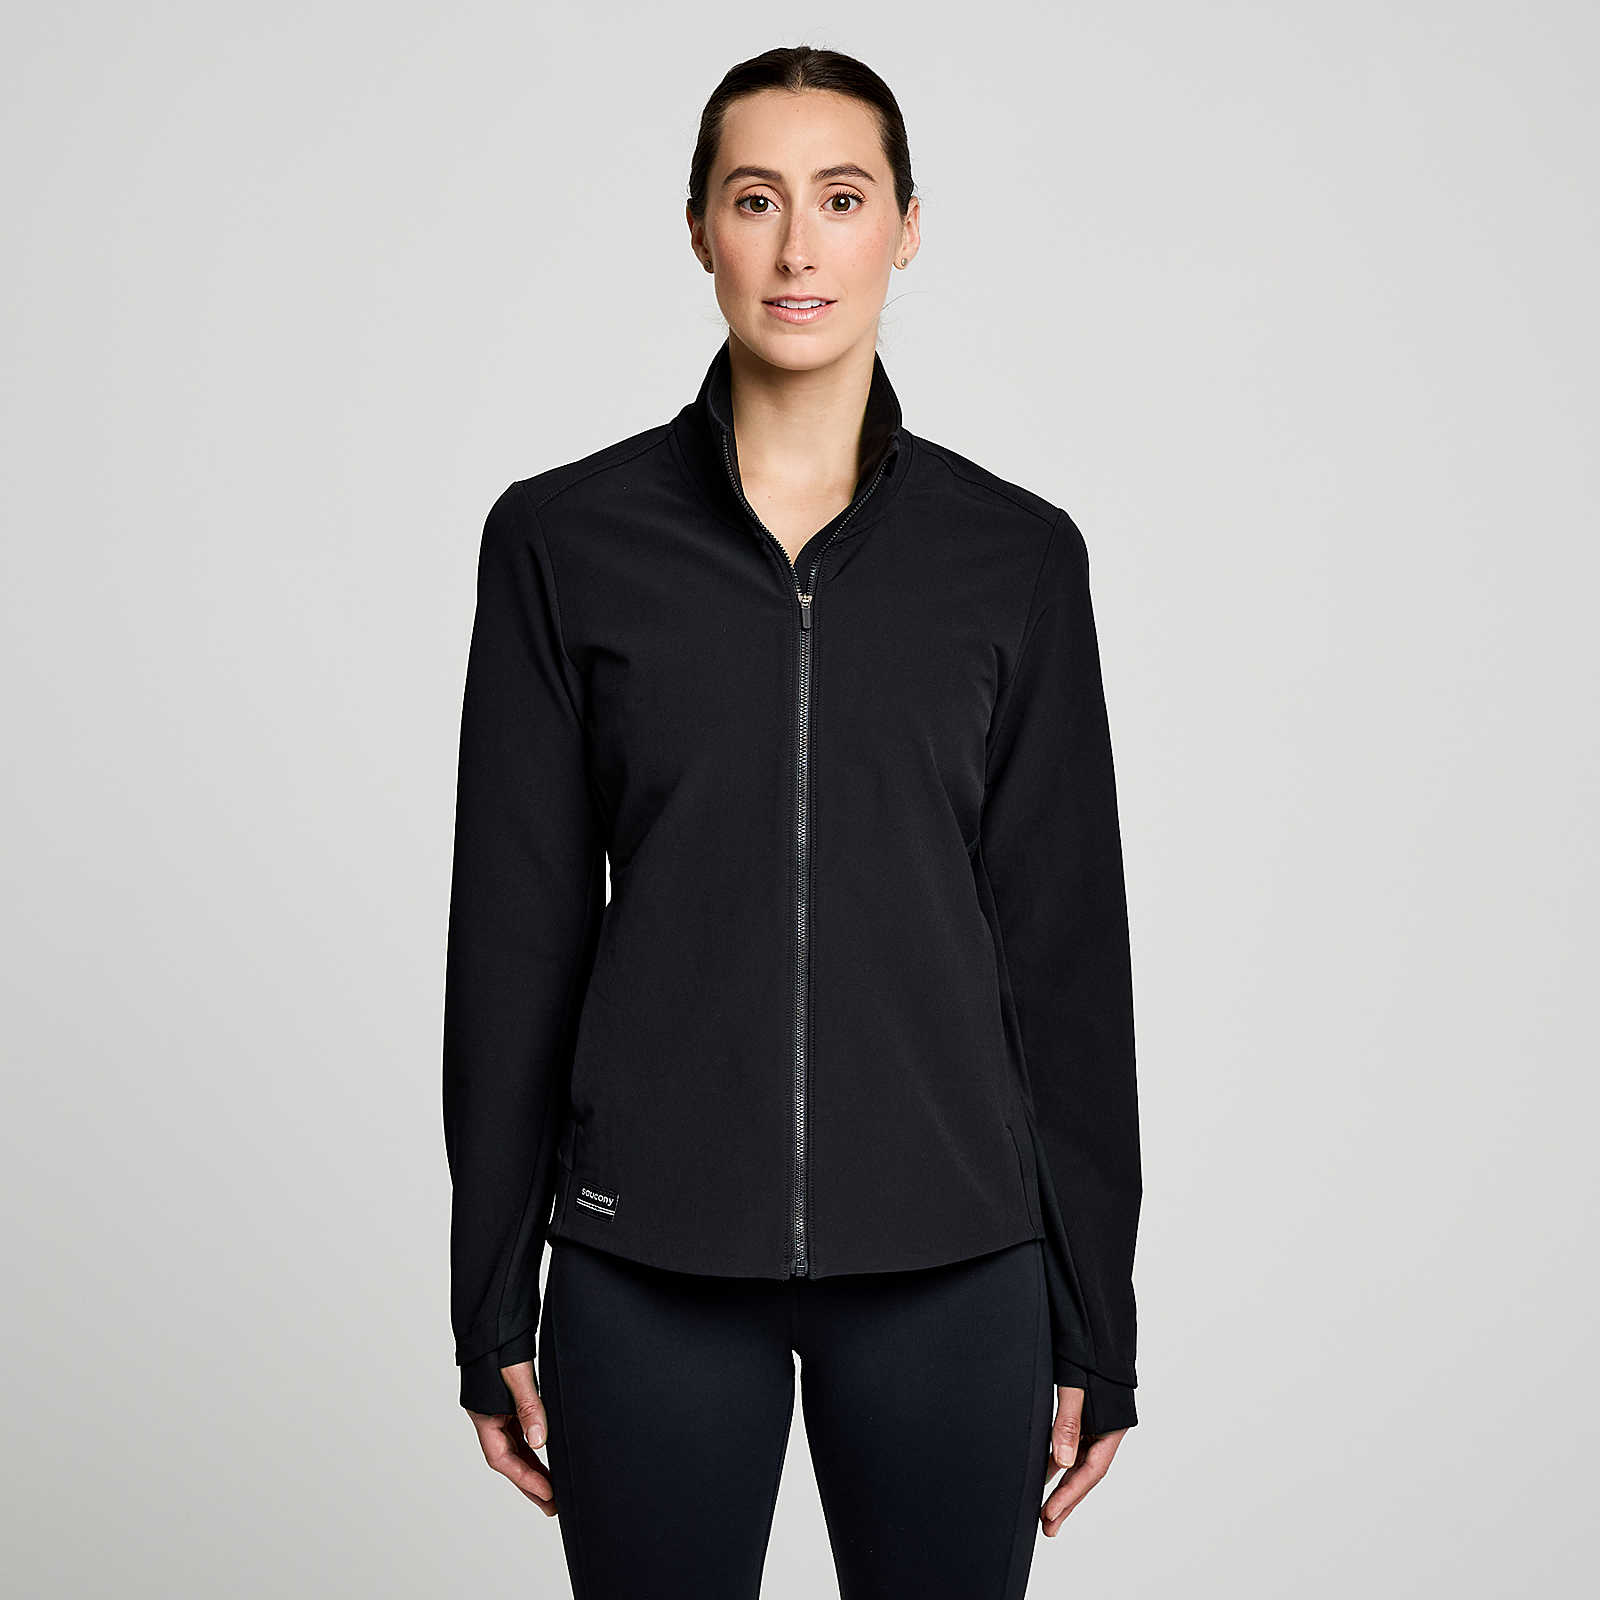 Performance TRIUMPH JACKET Outfitters | Running WOMEN\'S